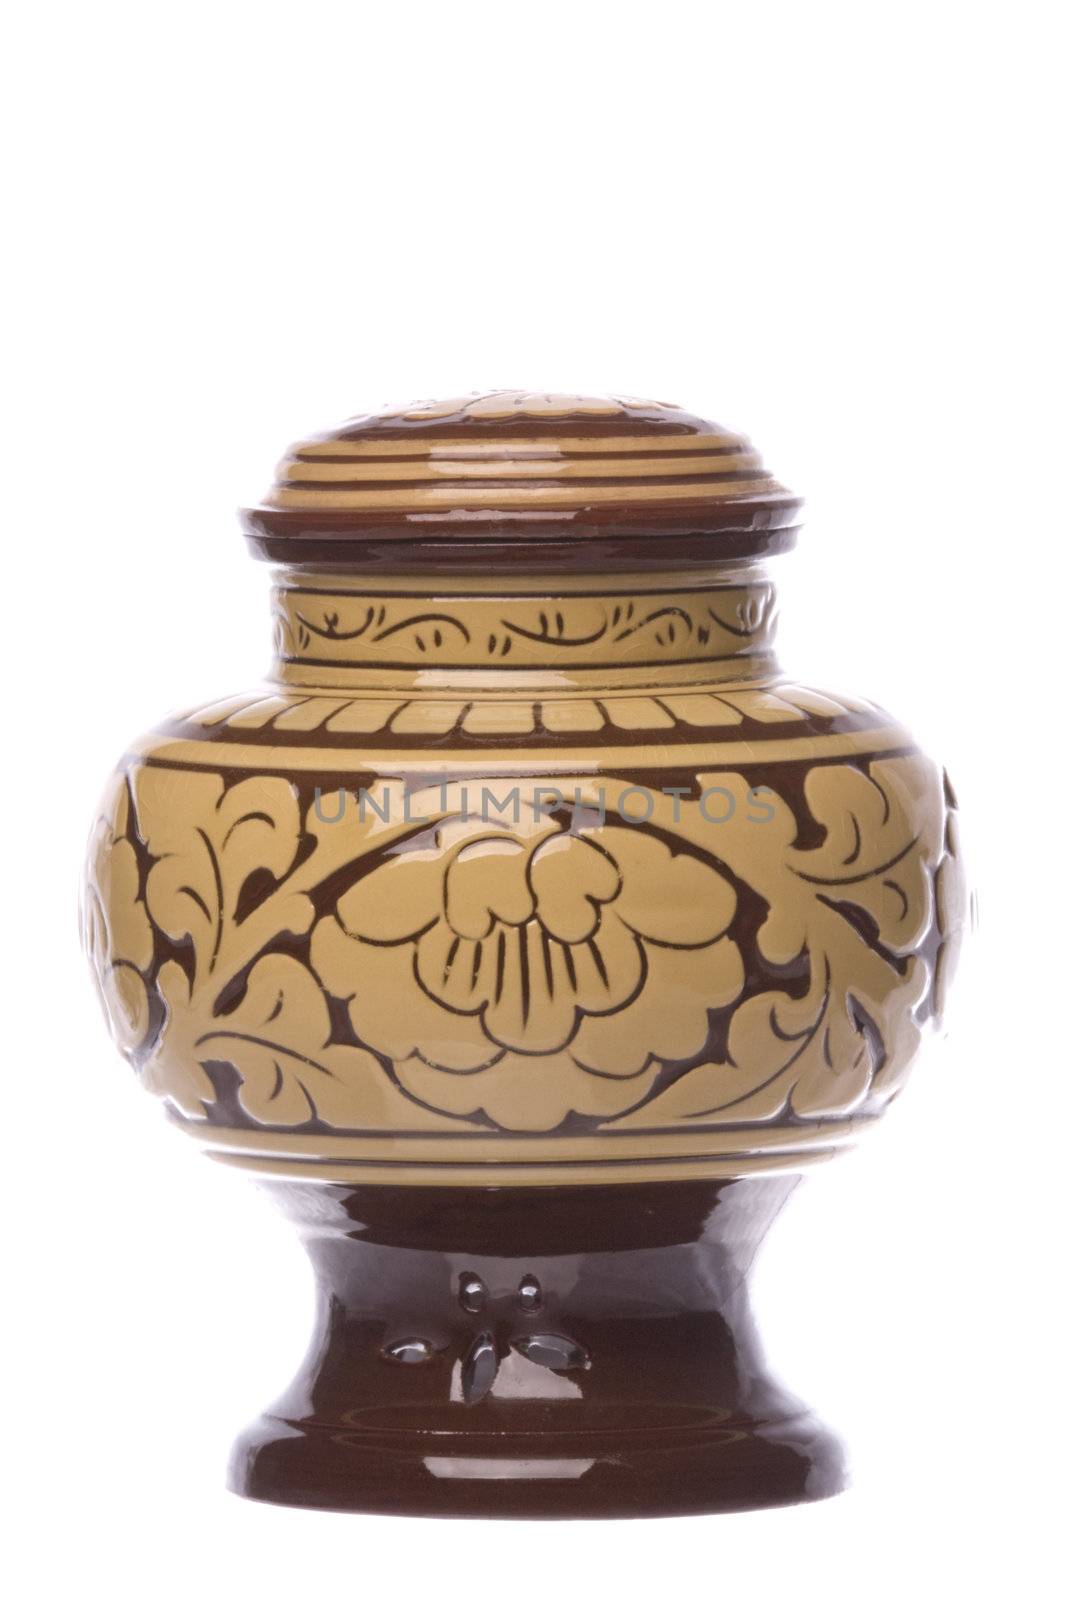 Isolated image of a soy bean urn.